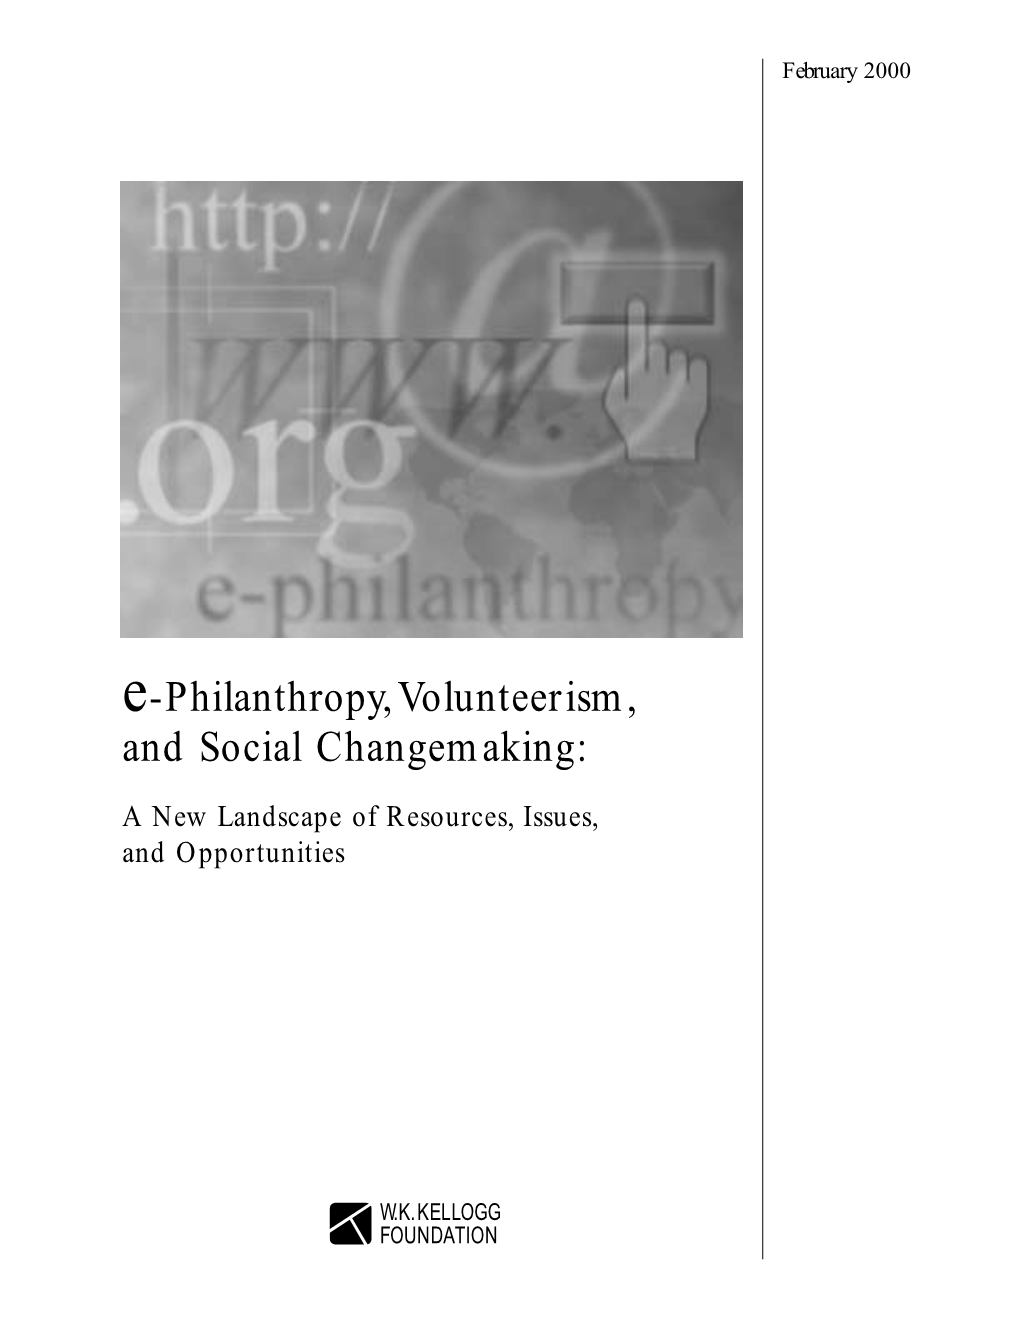 E-Philanthropy, Volunteerism, and Social Changemaking: a New